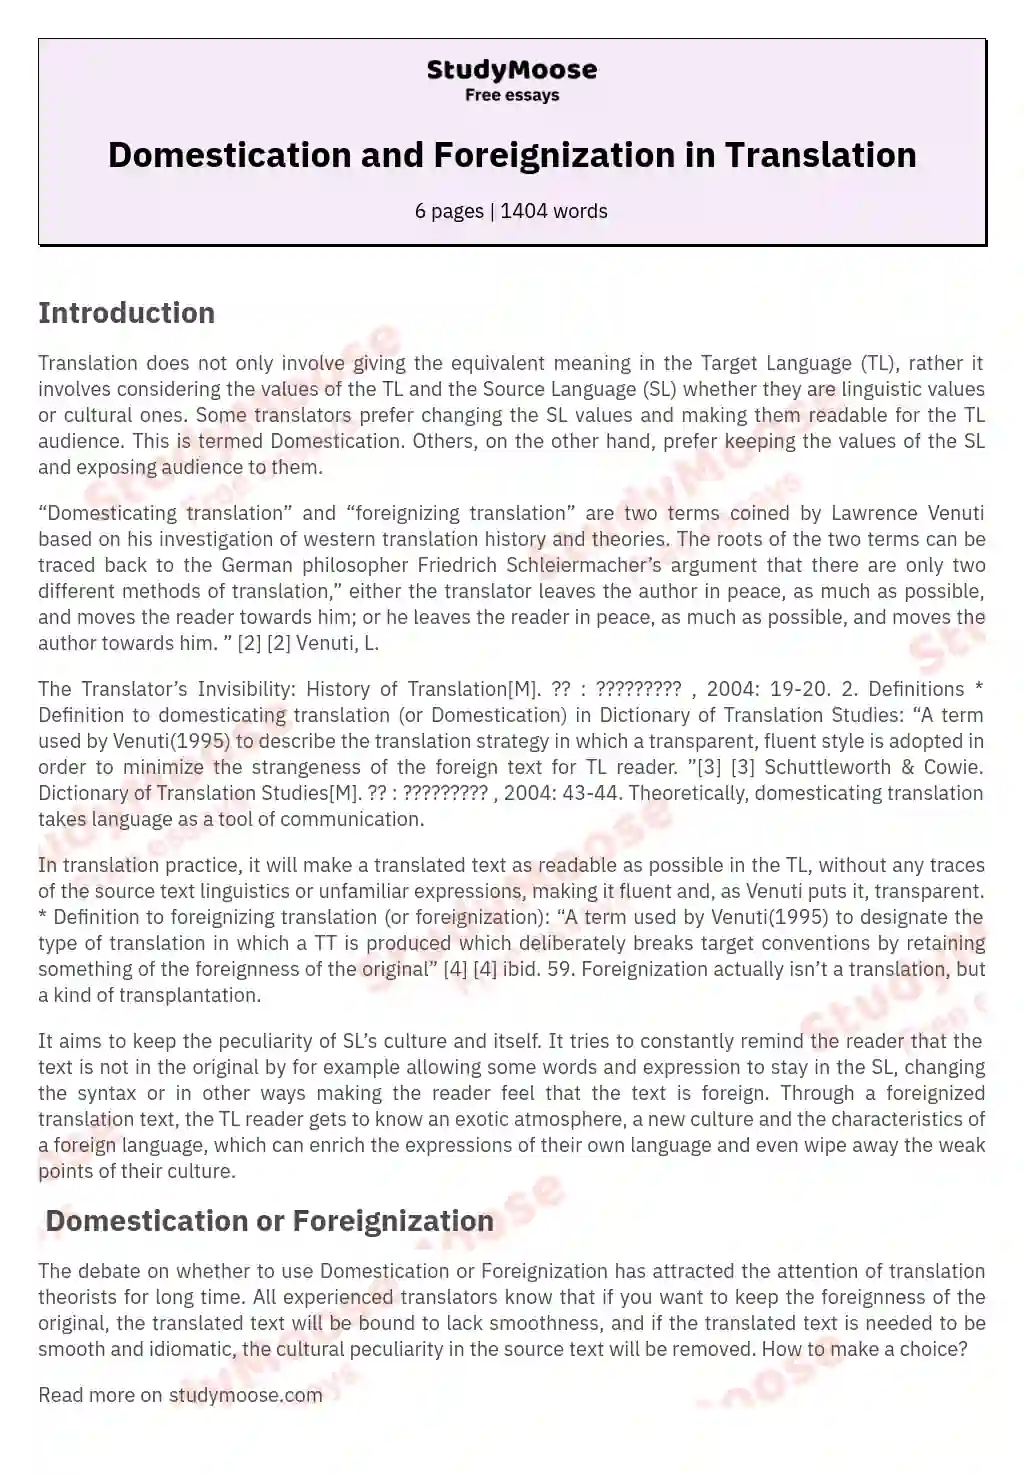 Domestication and Foreignization in Translation essay